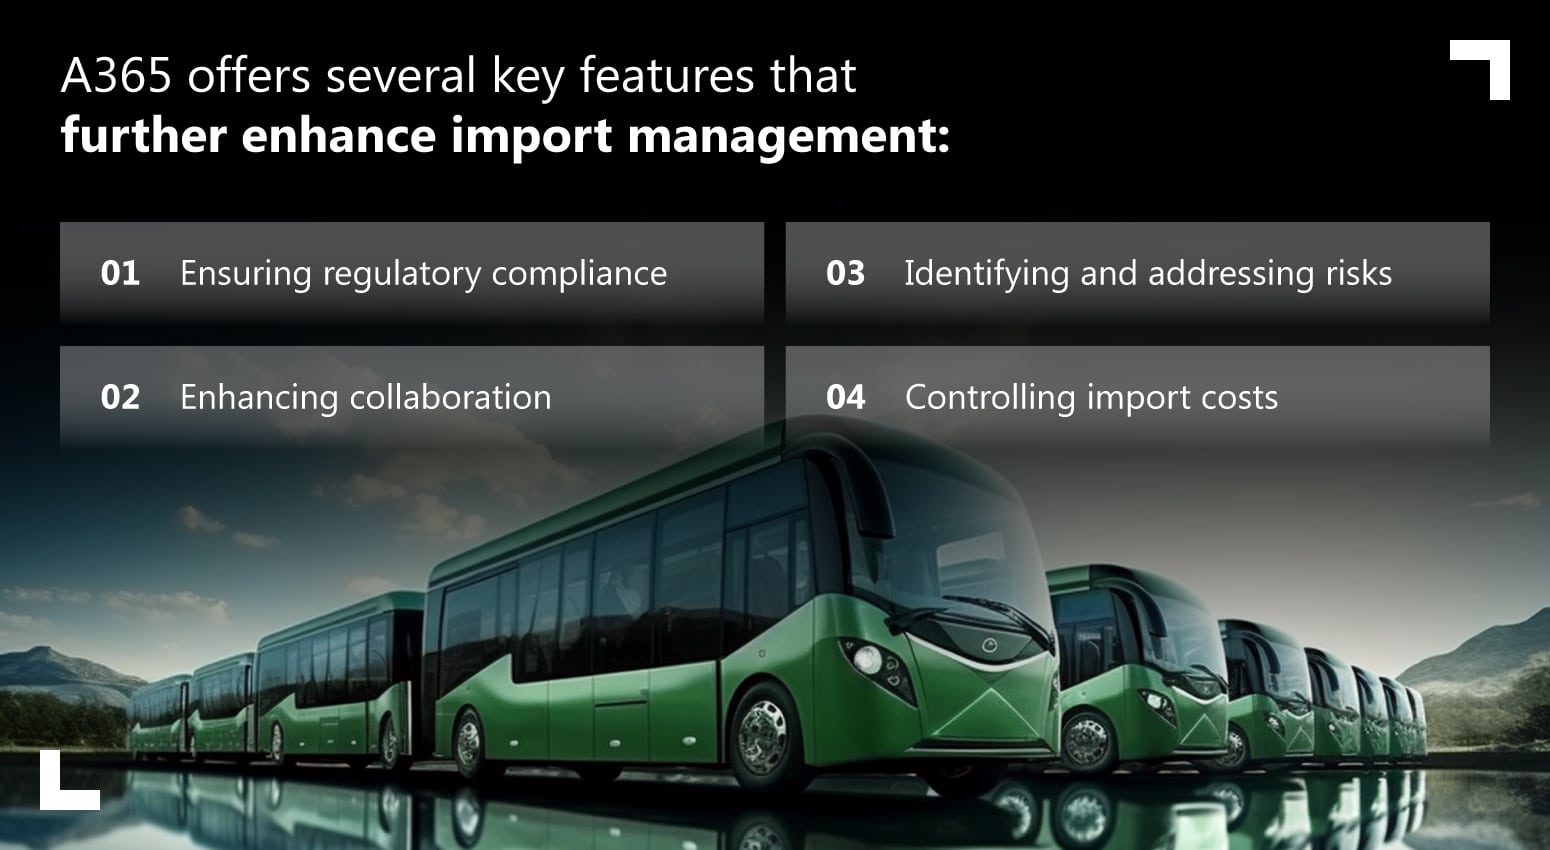 From complex processes to modernized control: Transforming import management in the truck & bus industry with A365  4